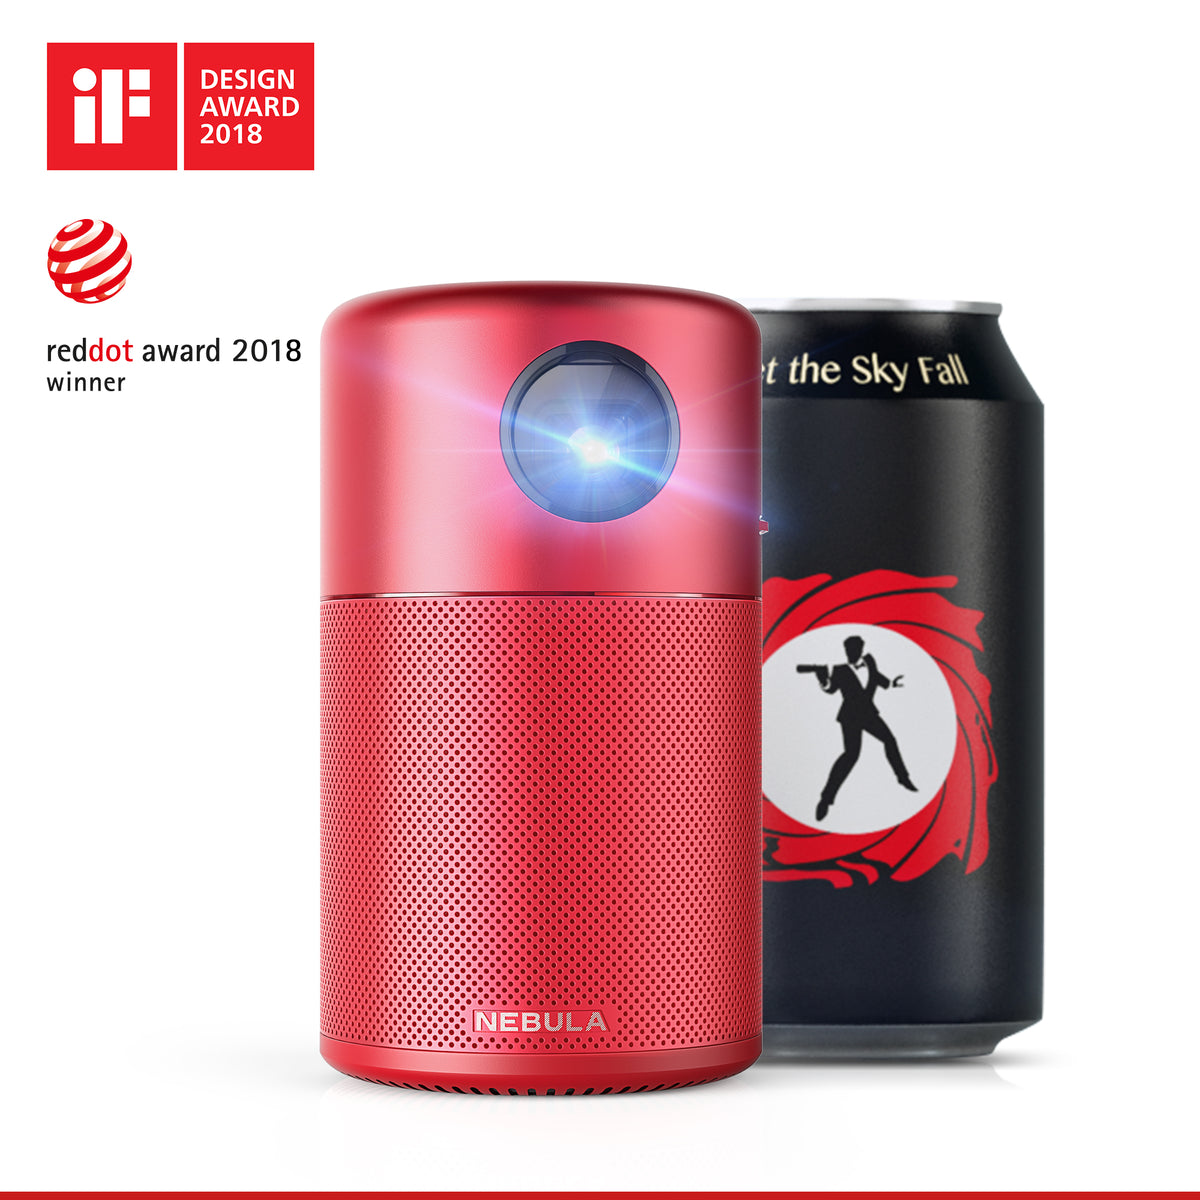 A red Capsule portable projector is next to a soda can with a James Bond logo, while a graphic states its winning design.